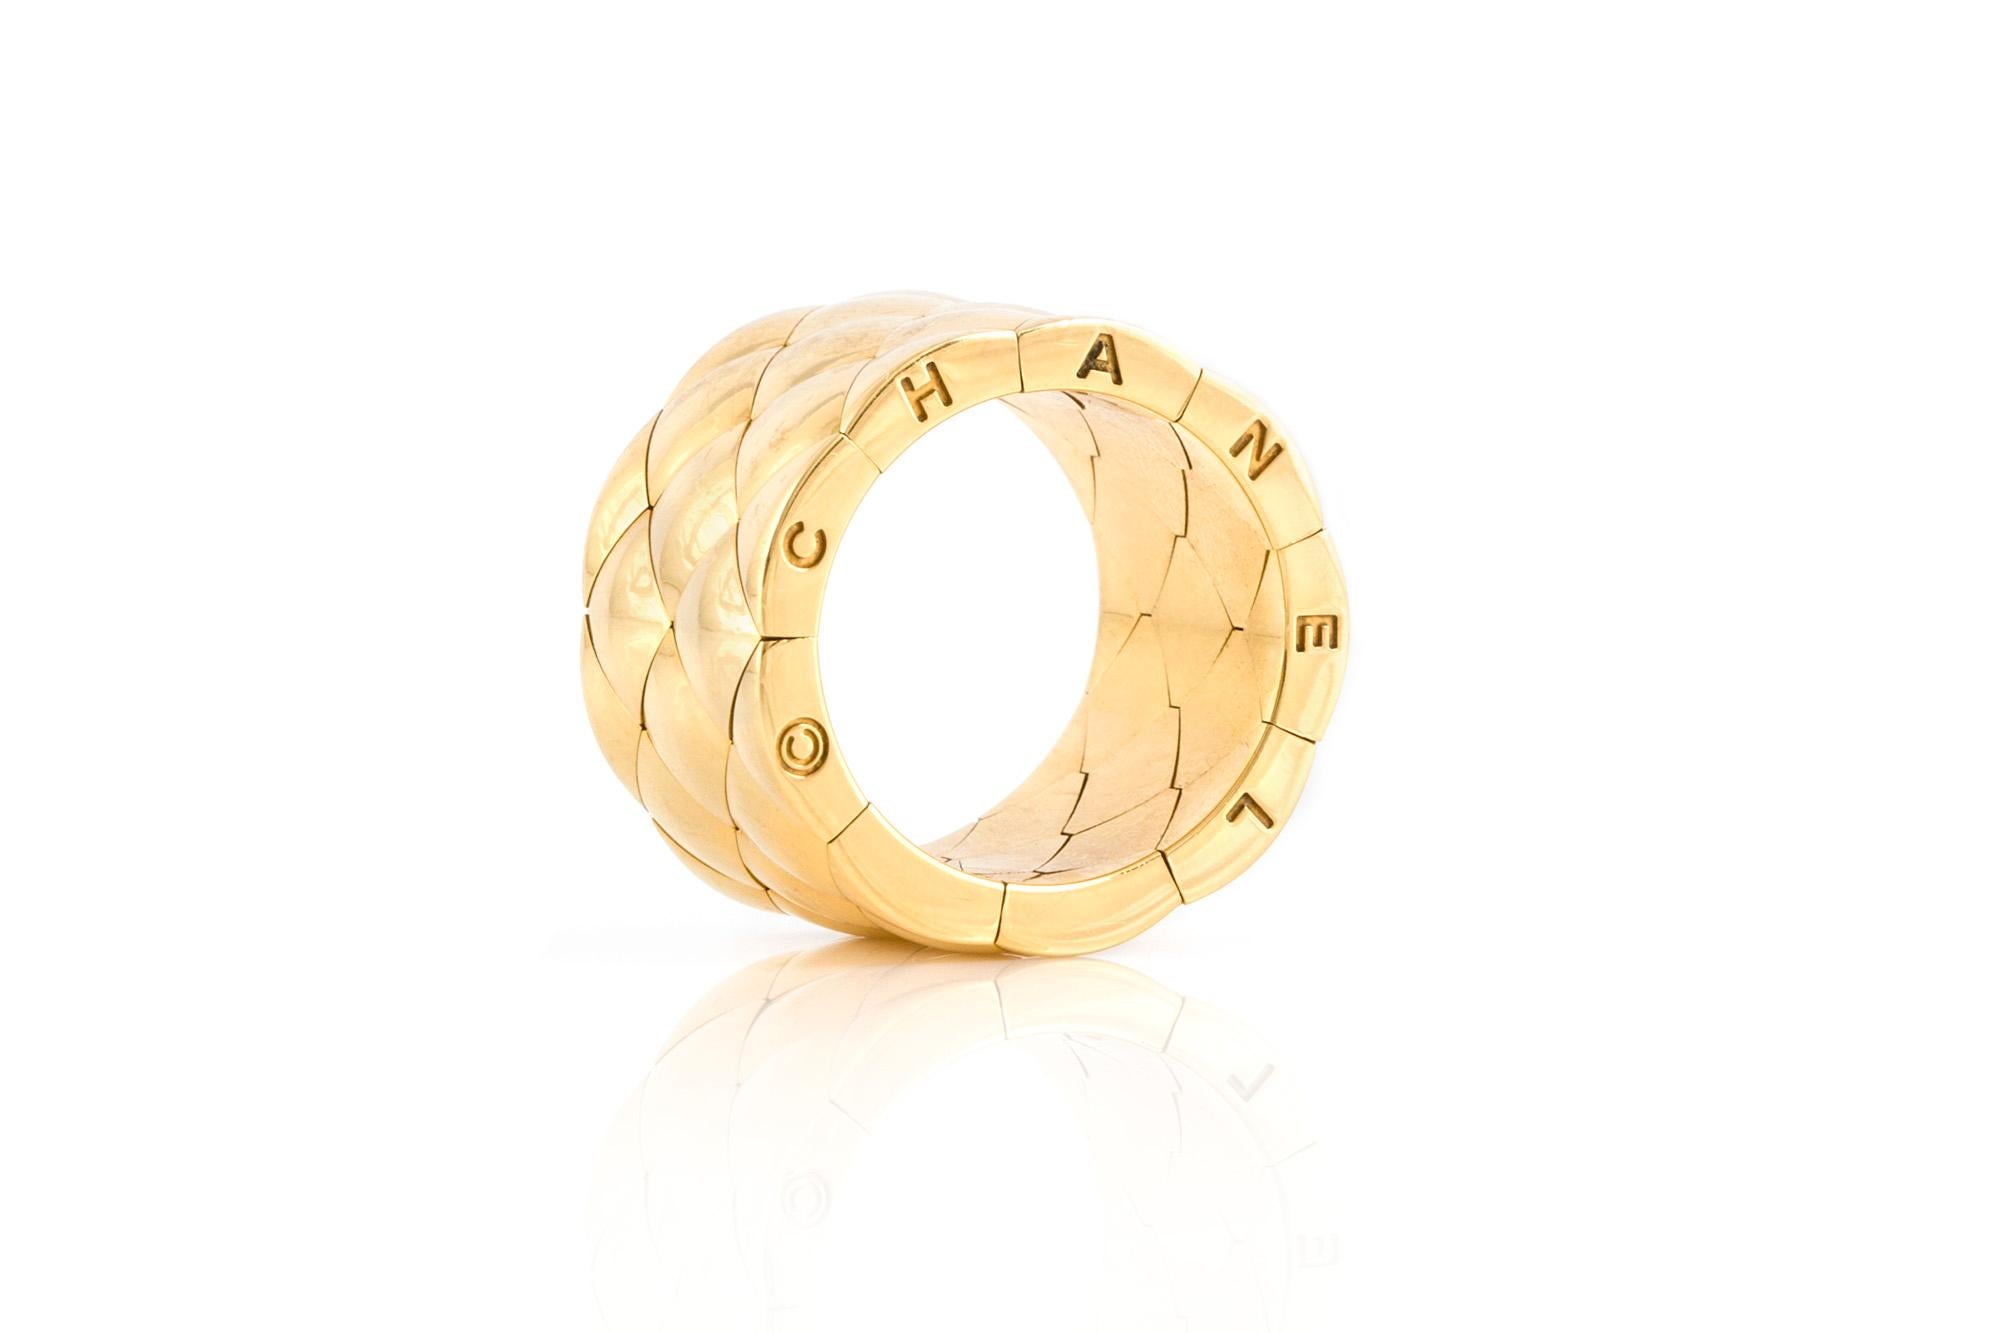 Signed by Chanel finely crafted in 18 k yellow gold ring. Ring size 7.75 and 0.5'' width.